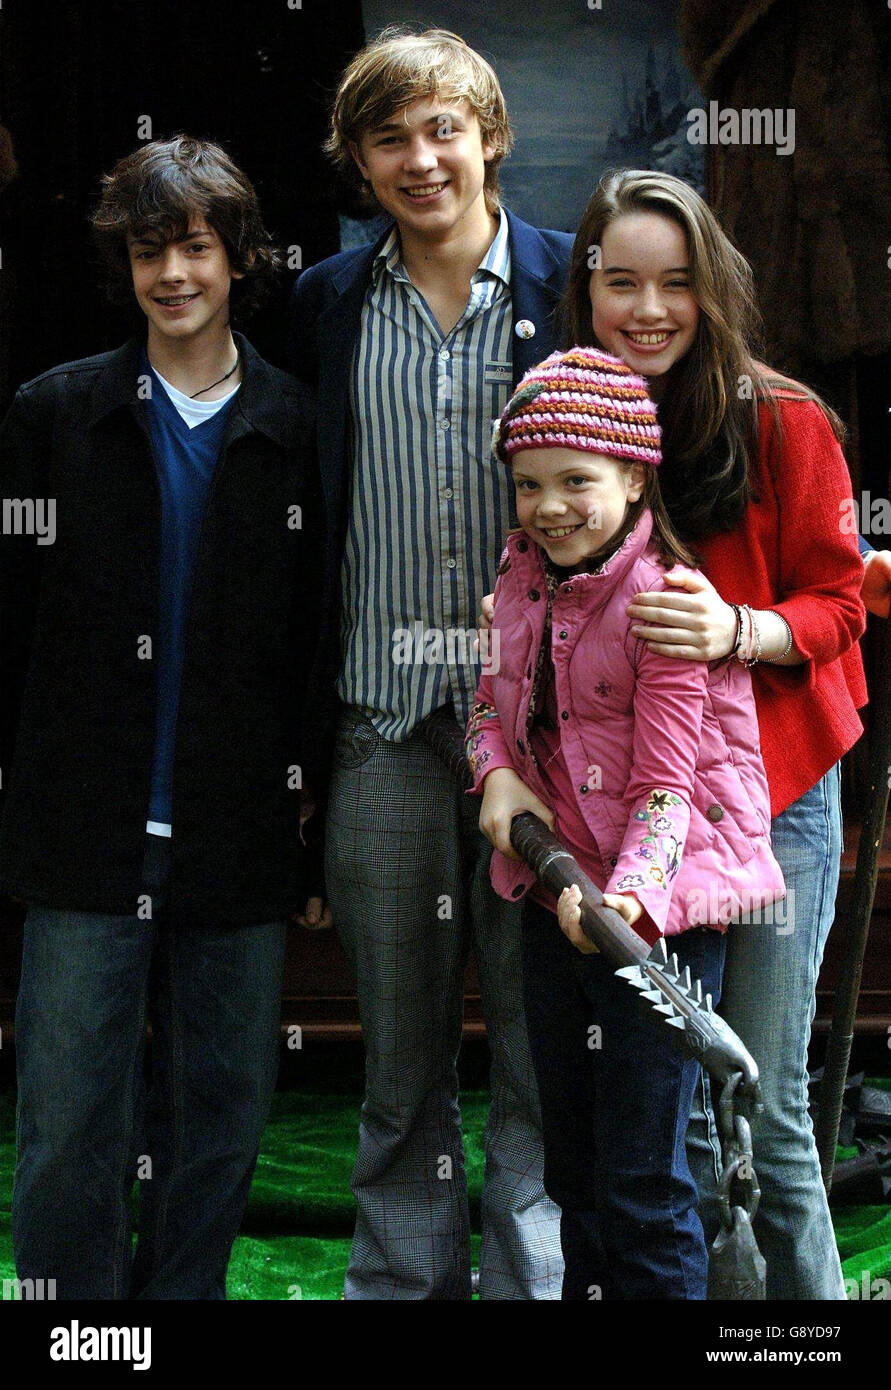 Stars from the new film 'The Chronicles of Narnia' - From left; Skandar Keynes (Edmund), William Moseley (Peter), Georgie Henly (Lucy, front) and Anna Popplewell (Susan) during the launch of the tenth National Schools Film Week at the Odeon Cinema in Leicester Square, central London, Wednesday 12 October 2005. See PA story SHOWBIZ Narnia. PRESS ASSOCIATION Photo. Photo Credit should read: Steve Parsons/PA. Stock Photo